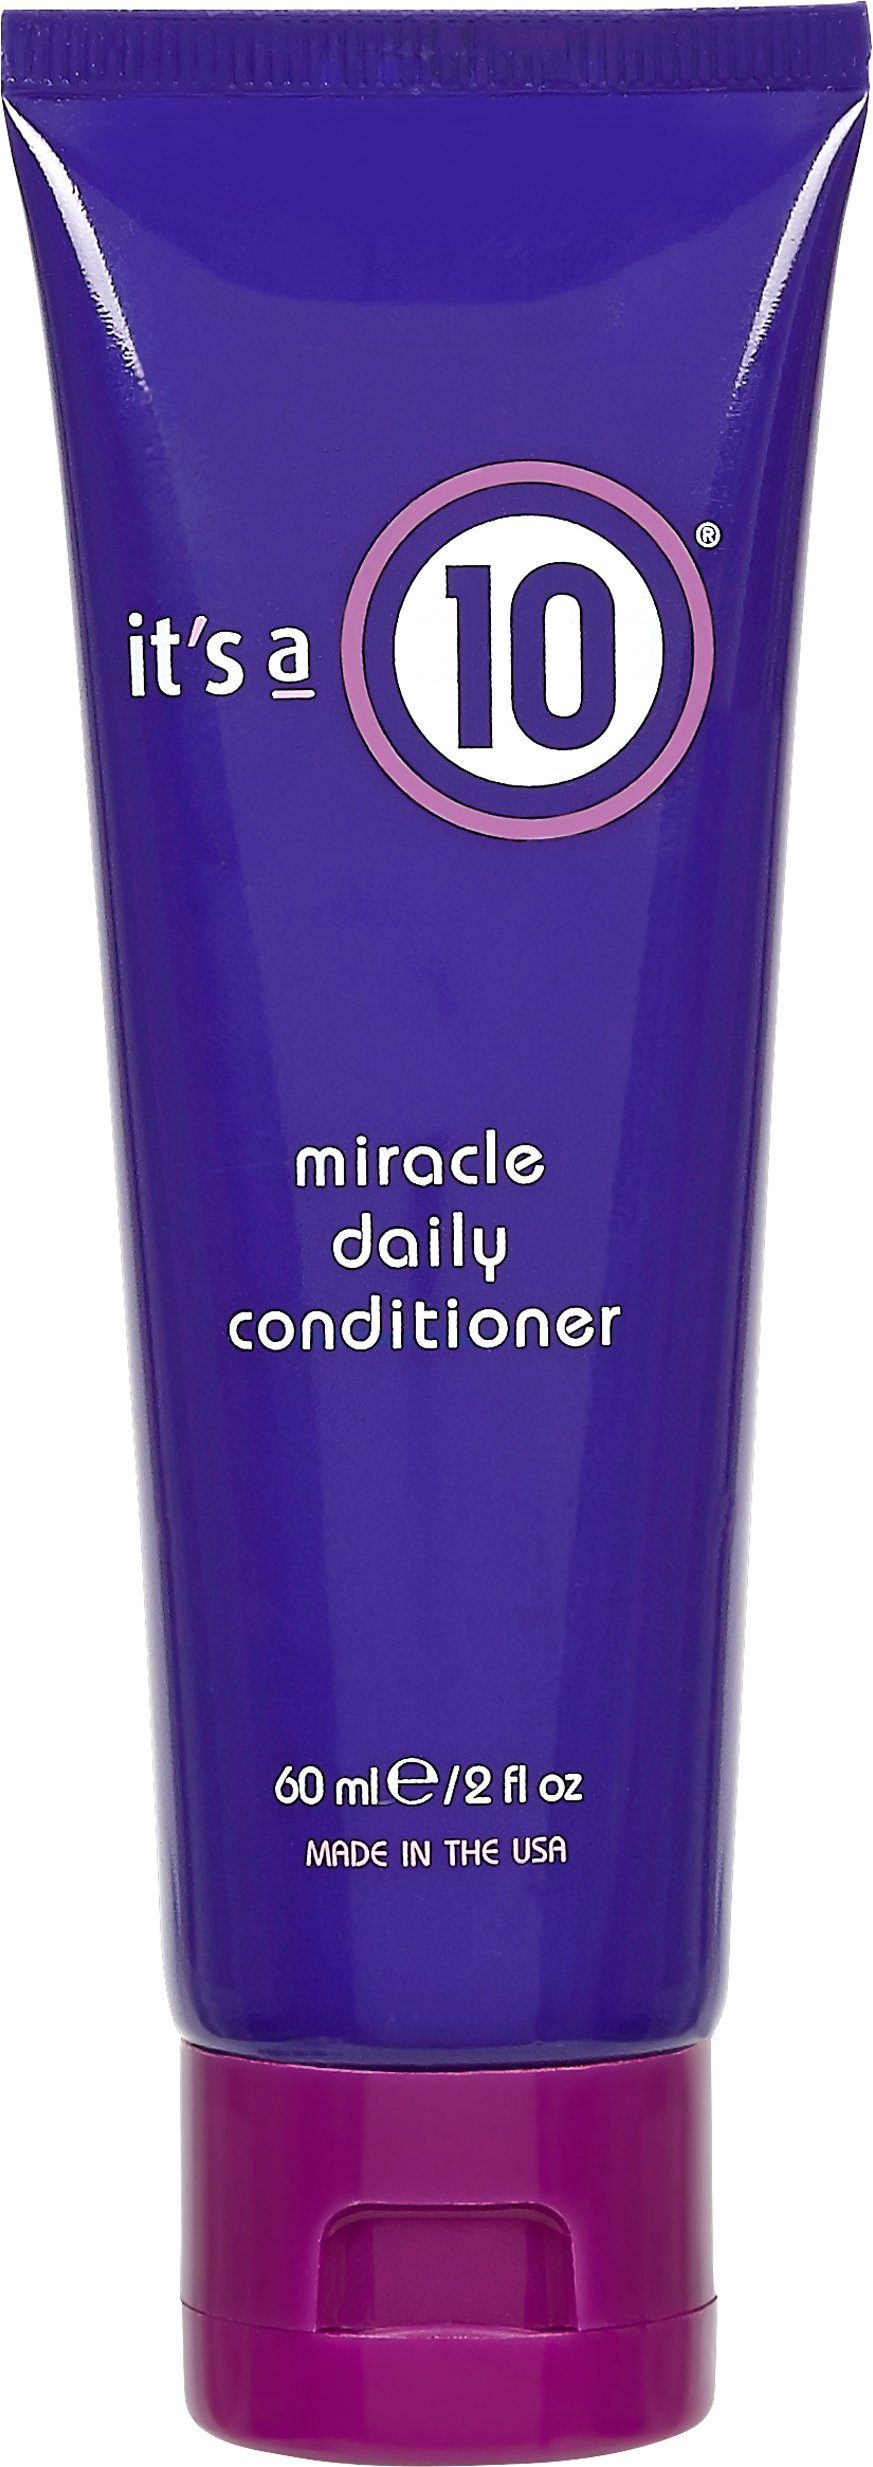 It's a 10 Miracle Daily Conditioner - 2oz Travel Size